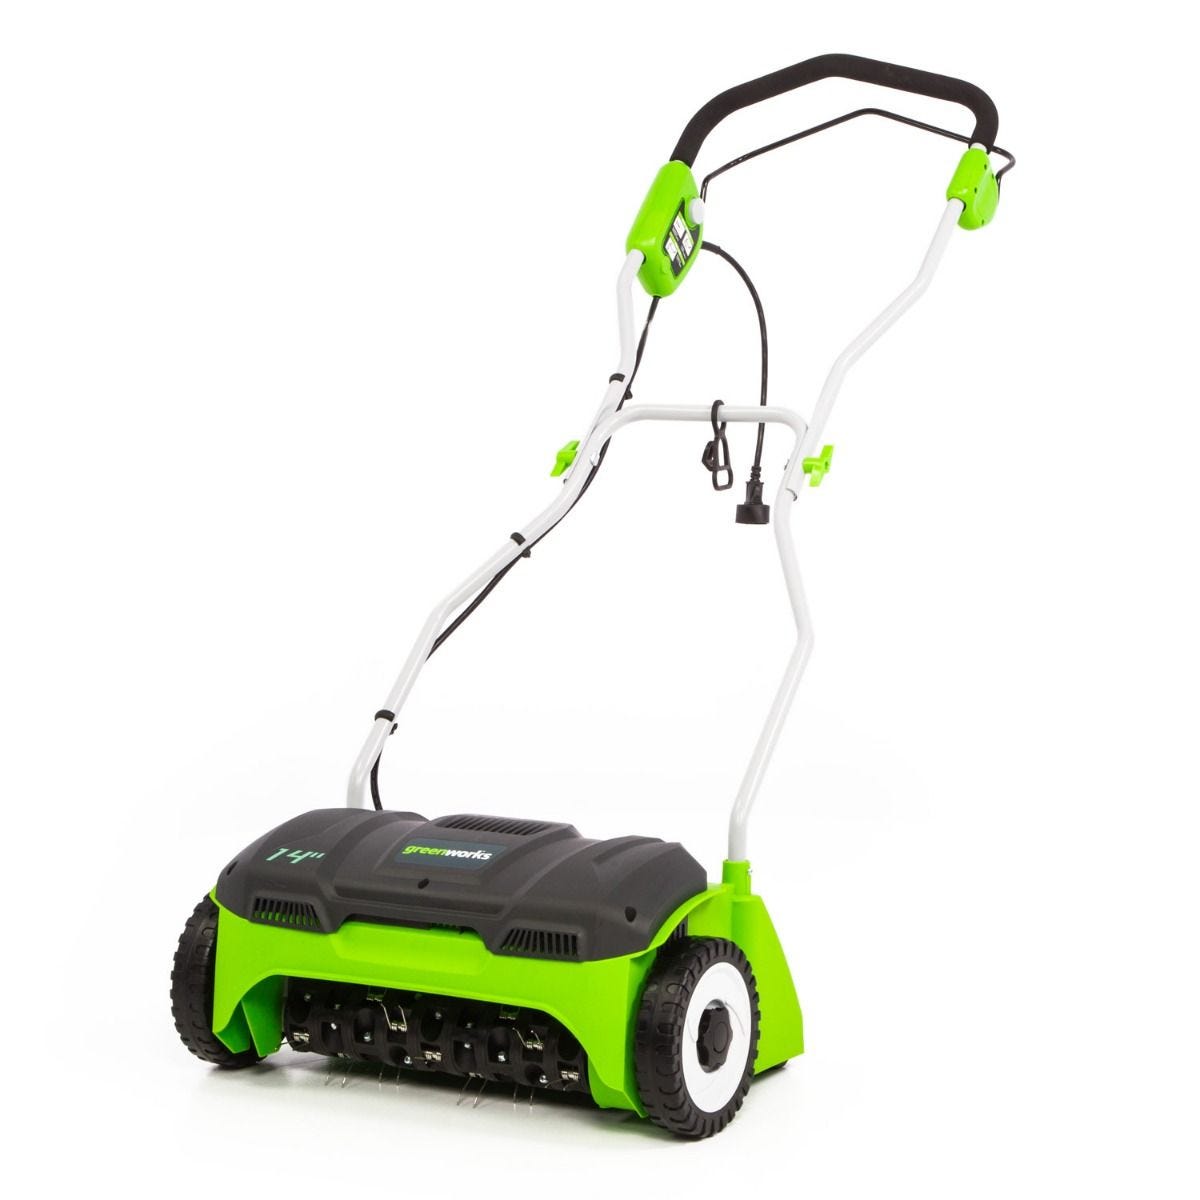 Greenworks 14 in. 10 Amp Corded Electric Dethatcher, DT14B00 - image 1 of 12